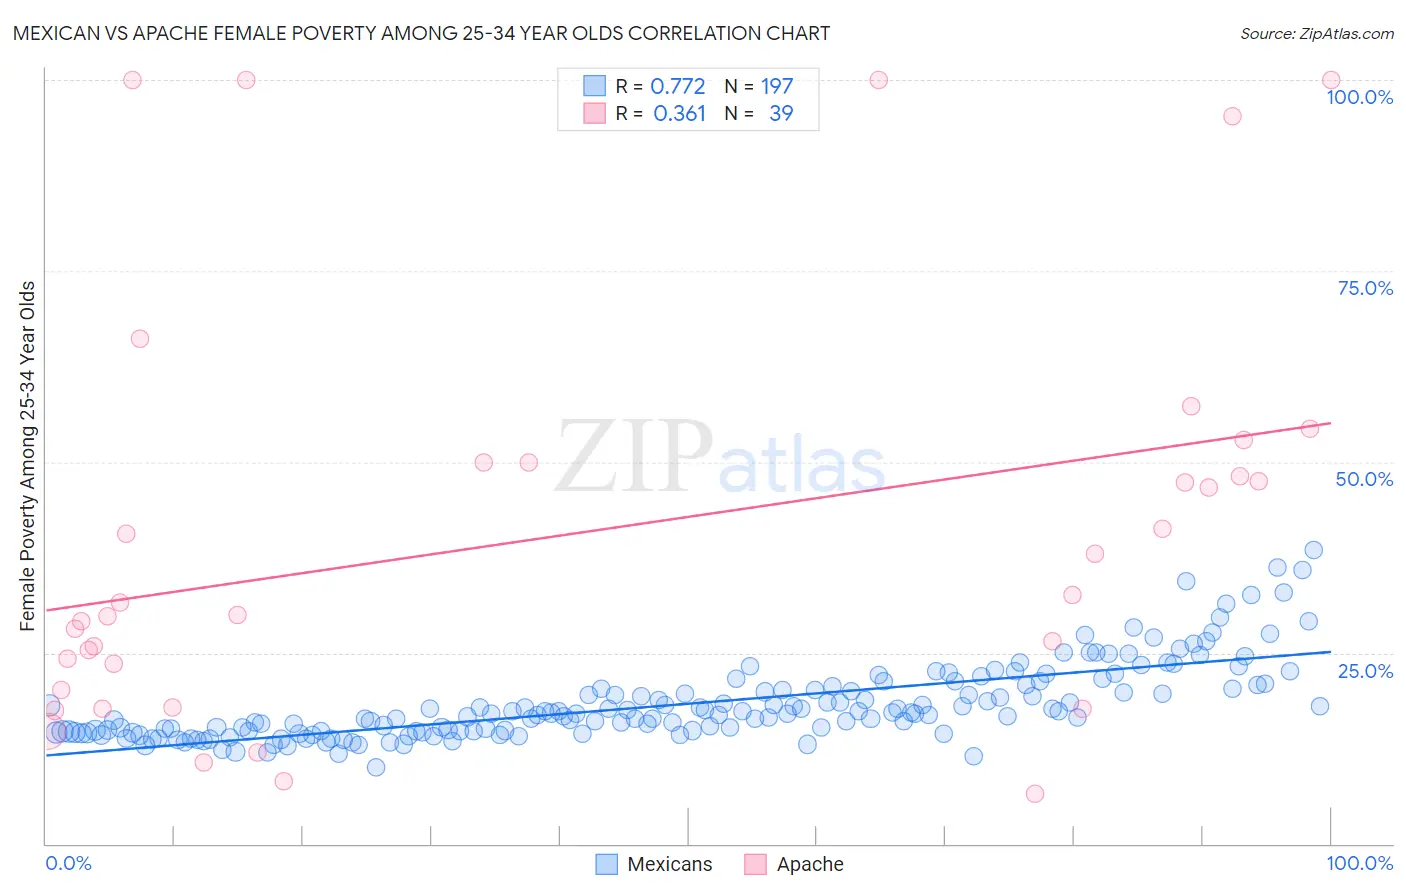 Mexican vs Apache Female Poverty Among 25-34 Year Olds